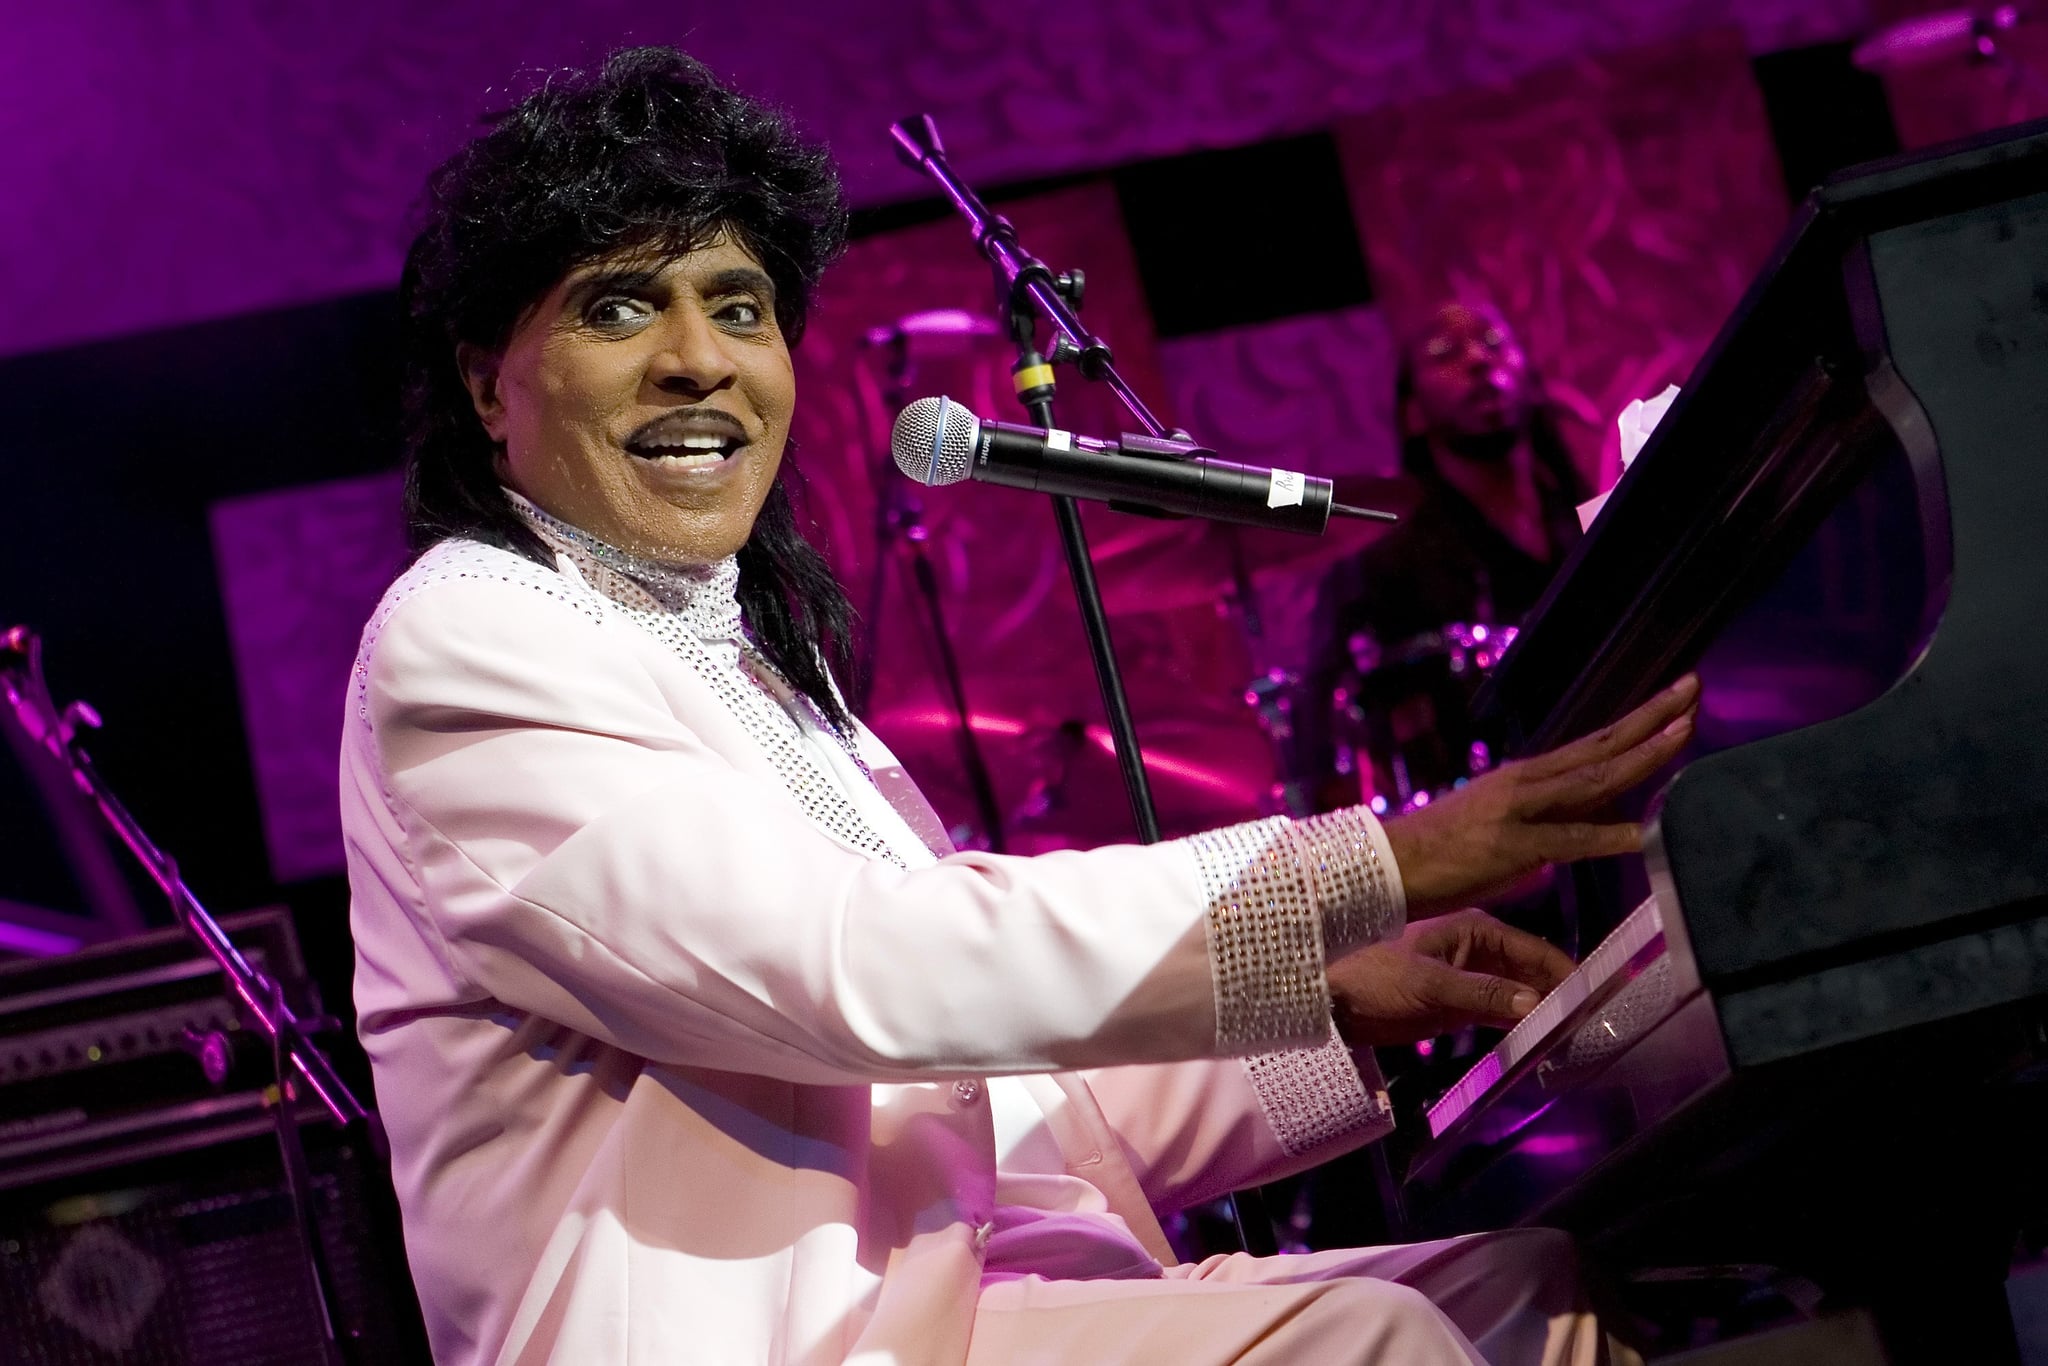 LAKE BUENA VISTA, FL - OCTOBER 17:  Little Richard performs during the Eat to the Beat concert series in Epcot at Walt Disney World on October 17, 2006  in Lake Buena Vista, Florida.  (Photo by Matt Stroshane/Getty Images)